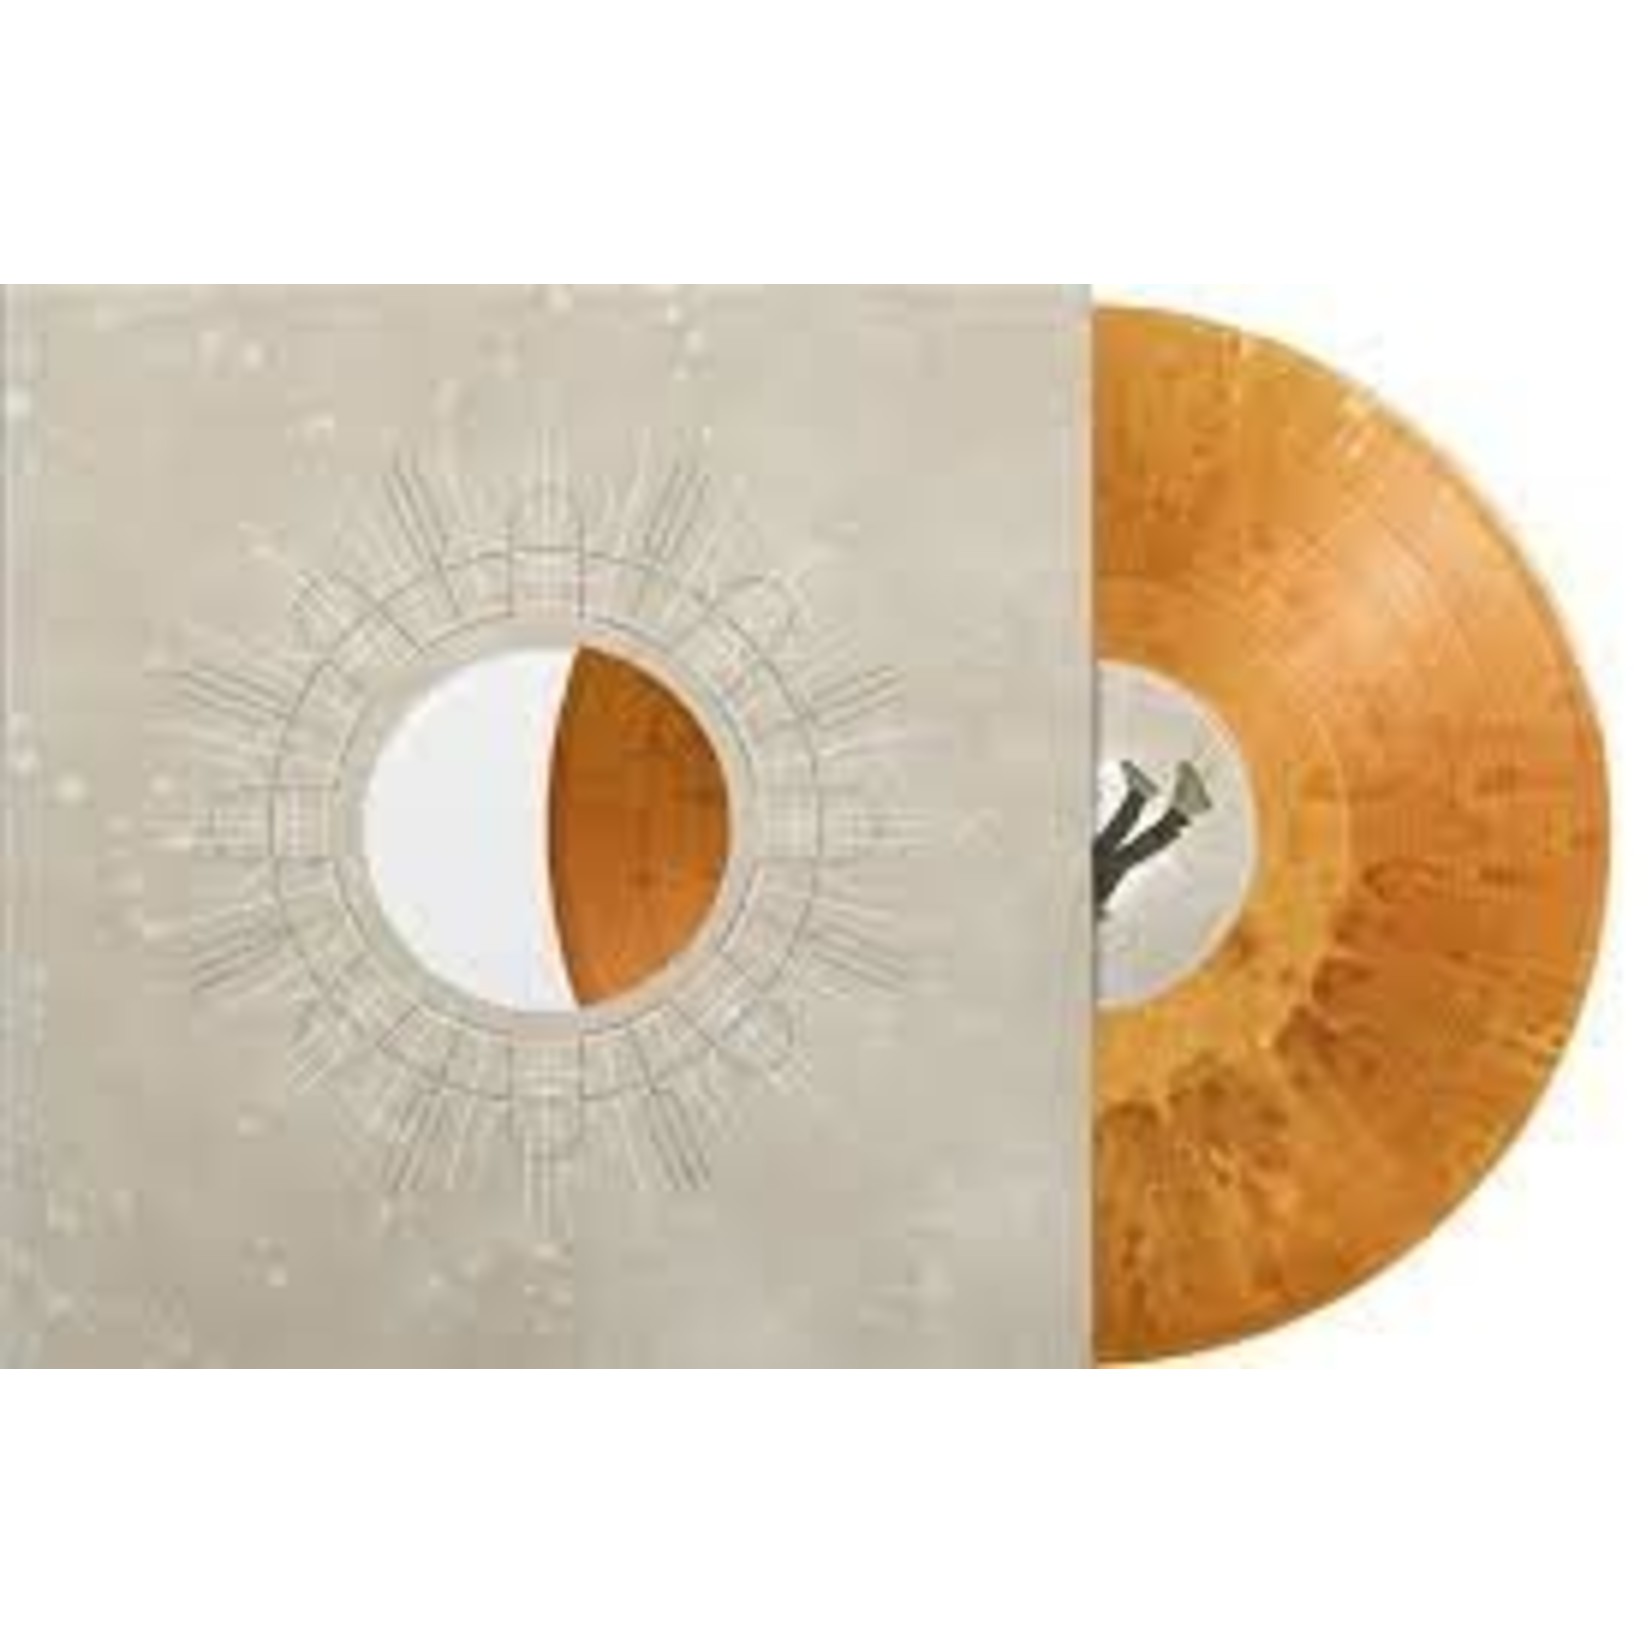 [New] Jerry Cantrell - Had To Know (12"EP, limited cloudy orange vinyl)